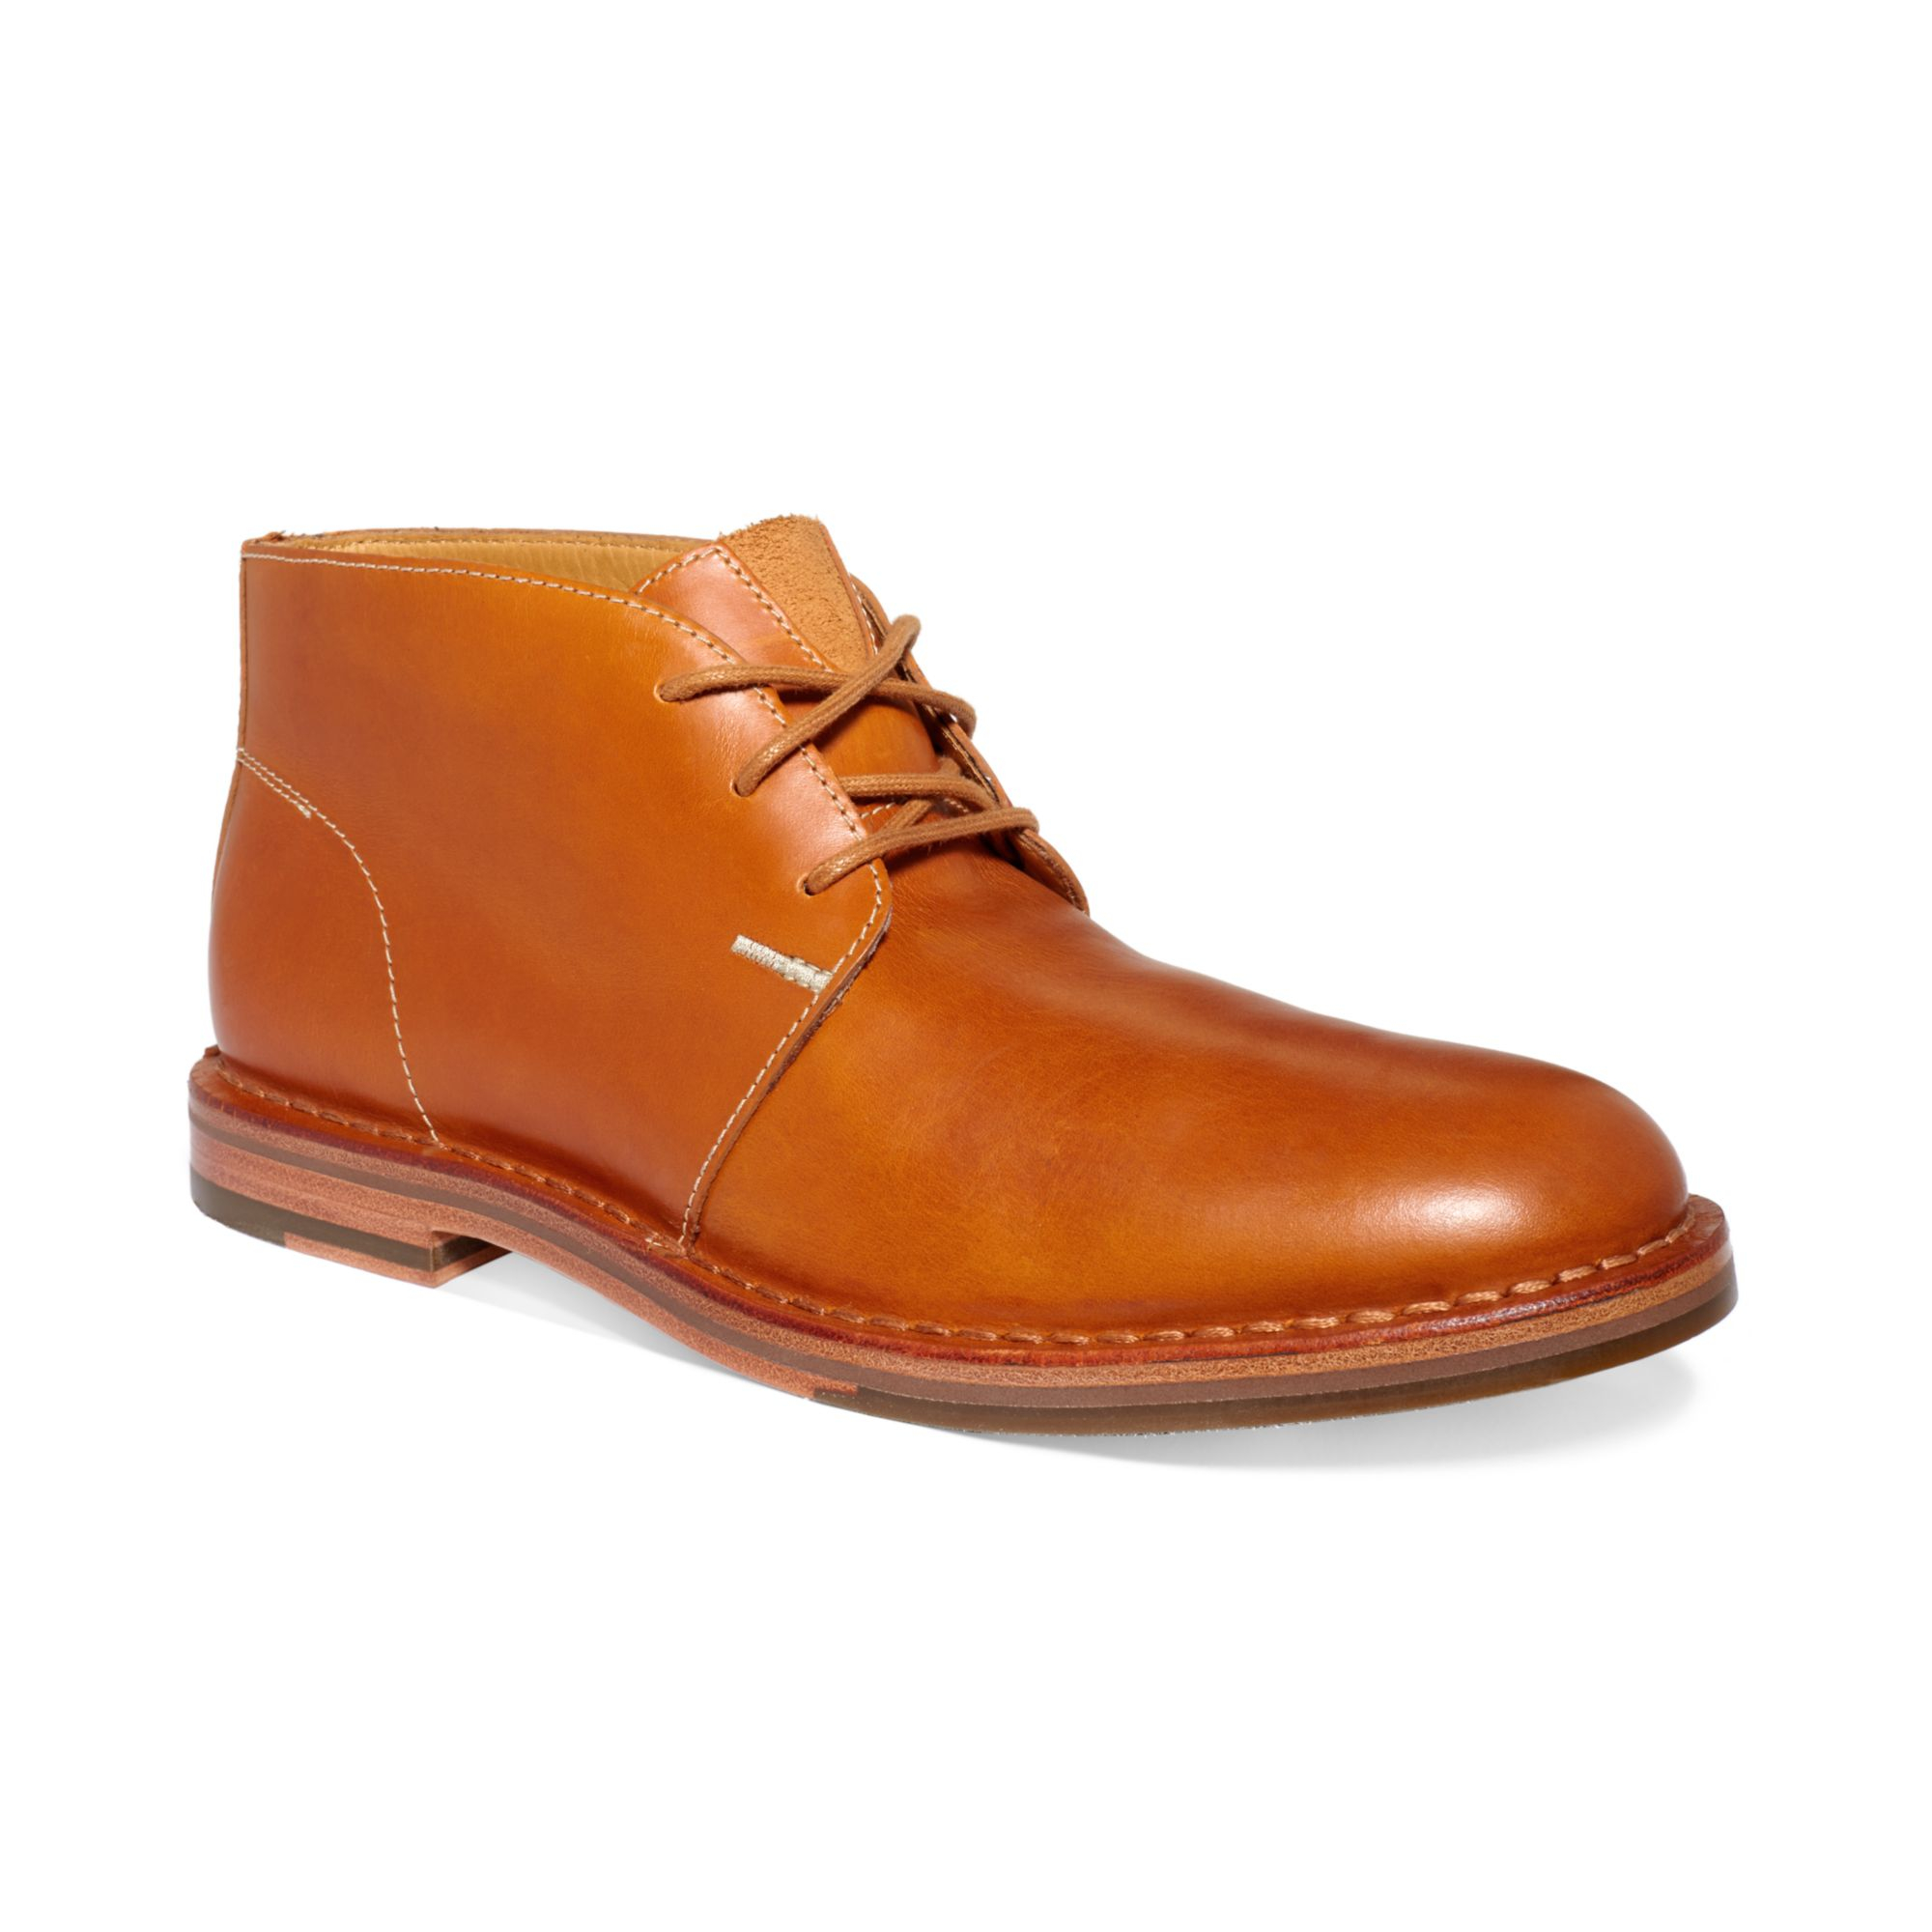 Lyst - Cole Haan Glenn Chukka Boots in Brown for Men